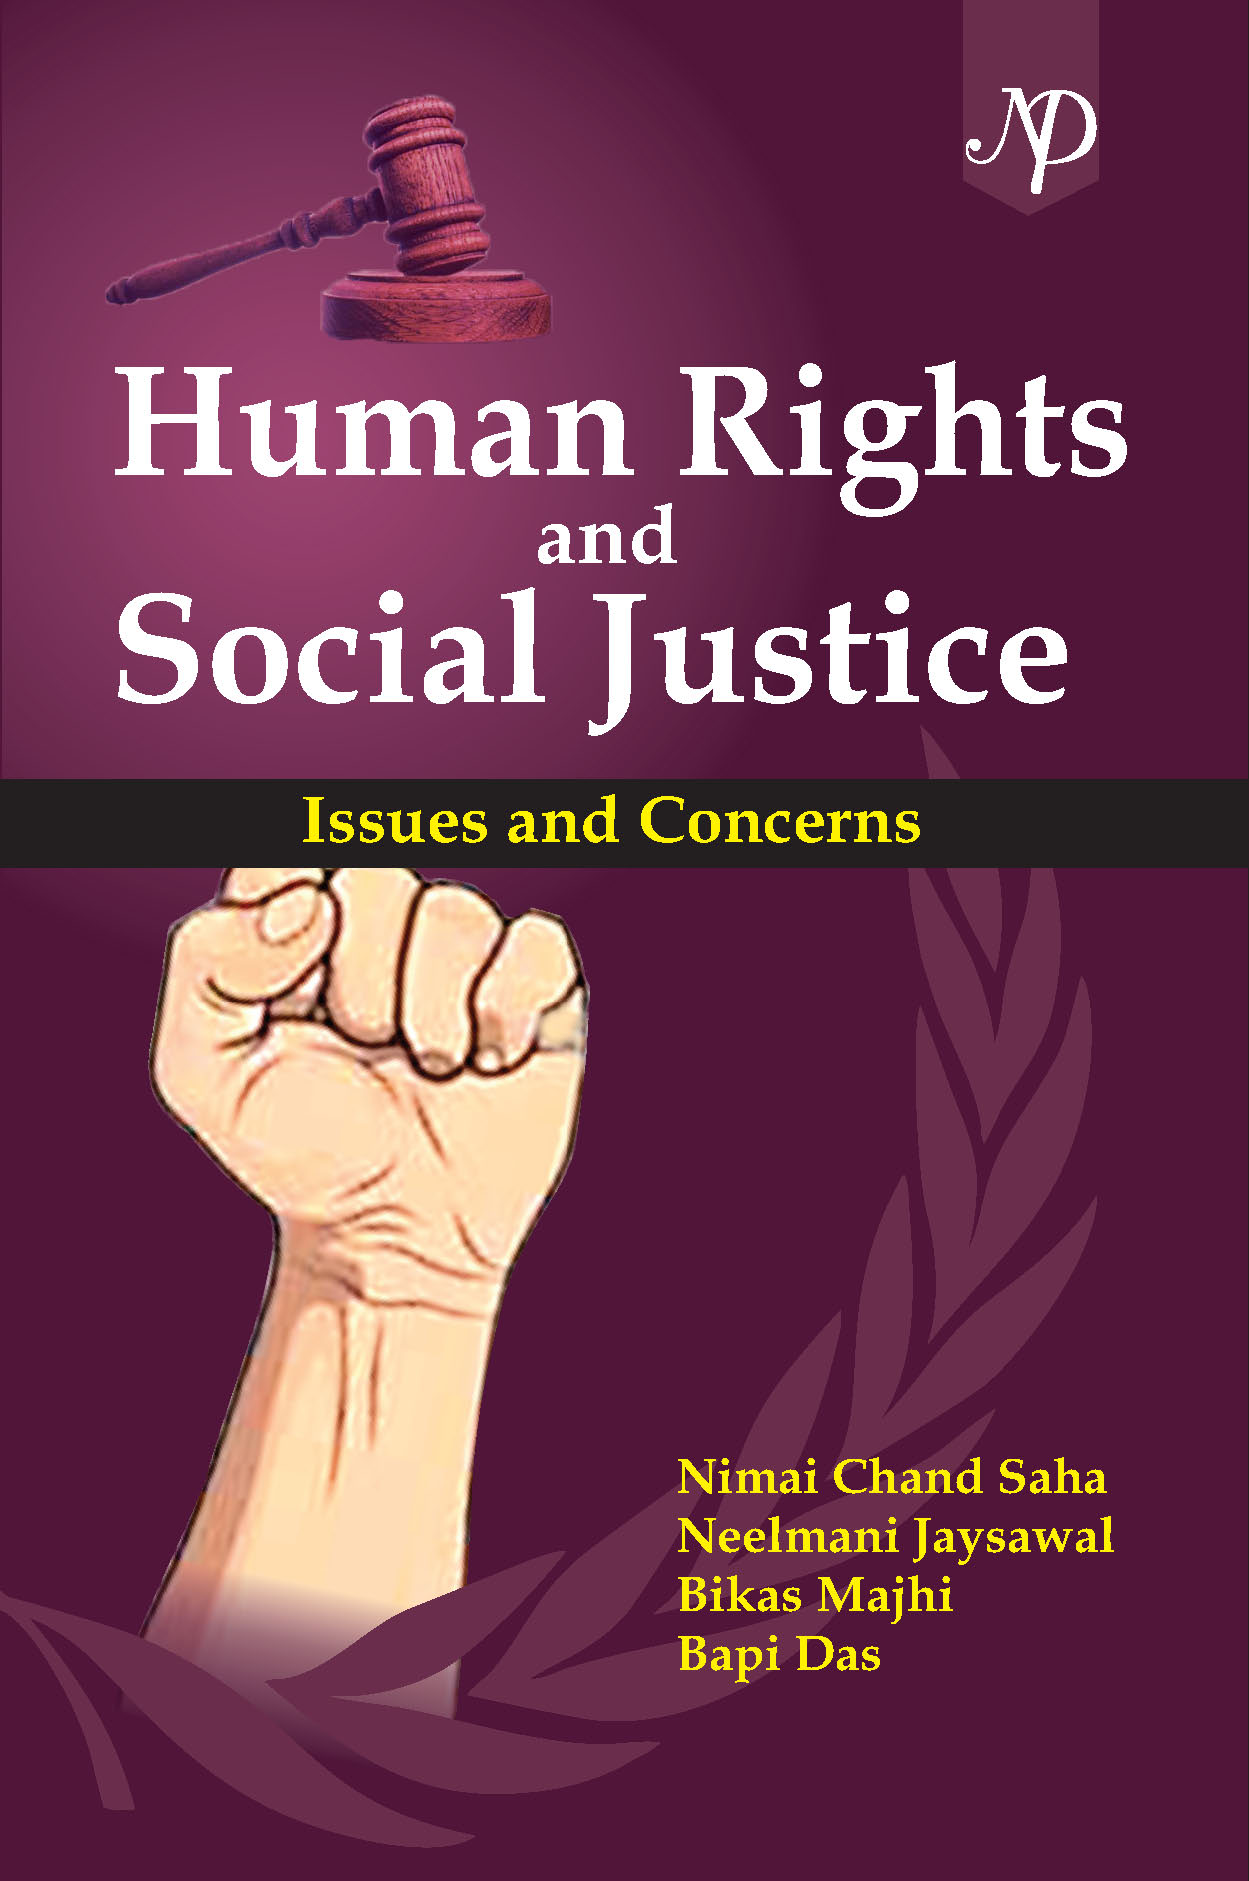 Human rights and Social justice by bhola nath - Cover.jpg